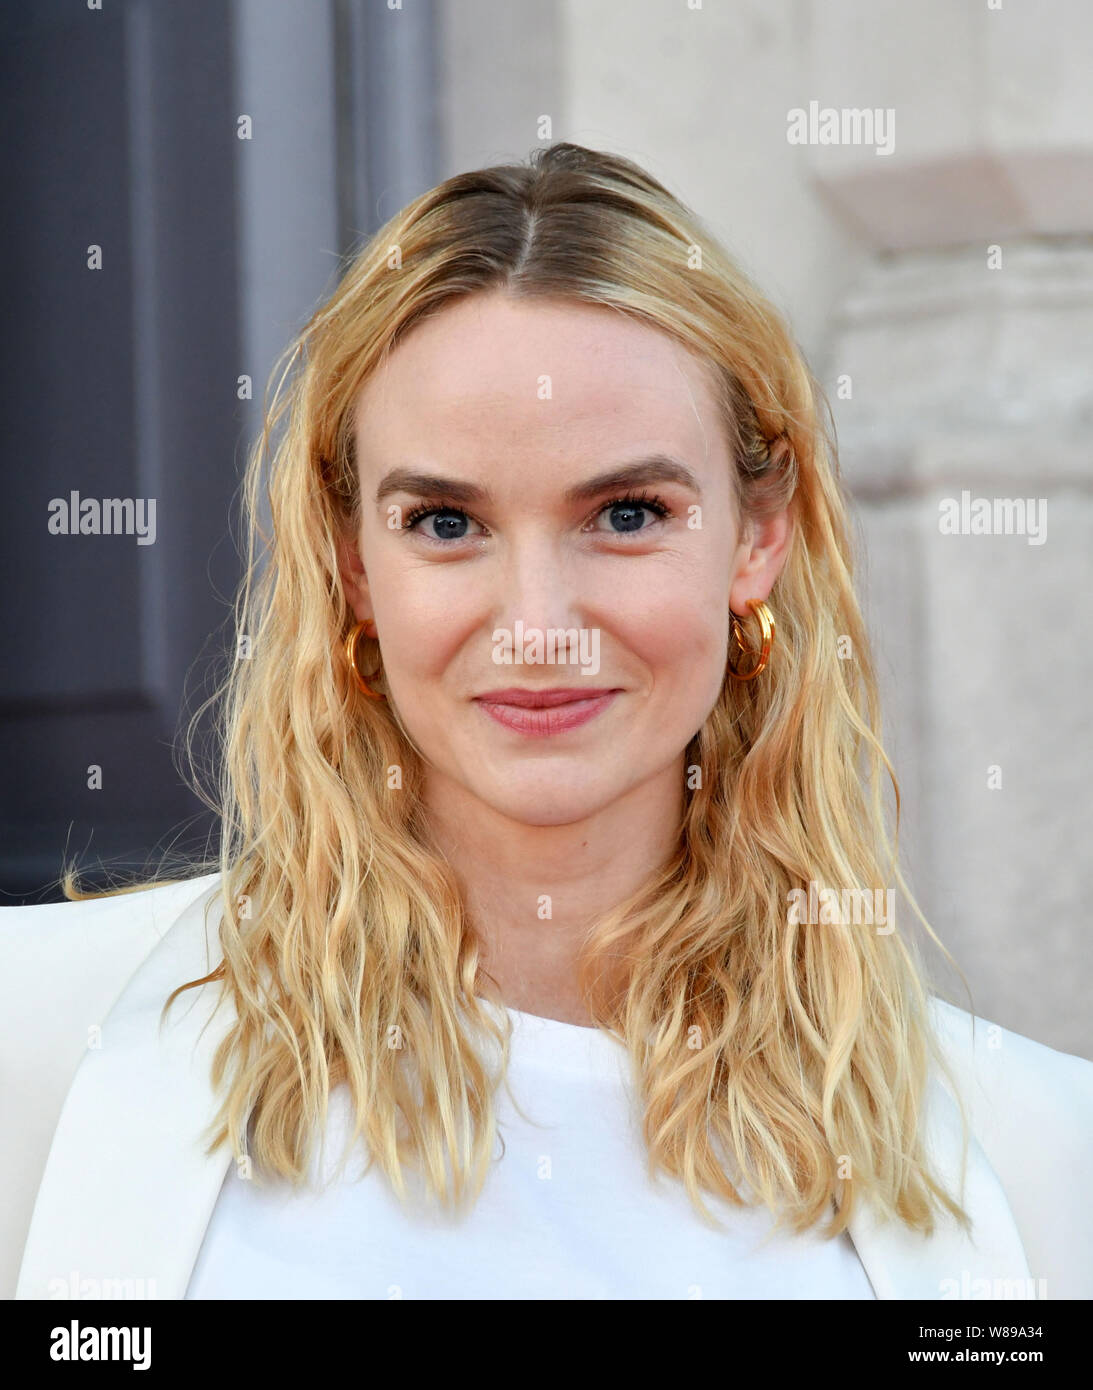 London, UK. 8th August, 2019. Joanna Vanderham attends Film4 Summer Screen annual film festival with the premiere of Pedro Almodóvar's Pain and Glory film, a drama about a film director who reflects on the choices he's made in life as past and present come crashing down around him, at Somerset House  London, UK - 8 August 2019 Credit: Nils Jorgensen/Alamy Live News Stock Photo